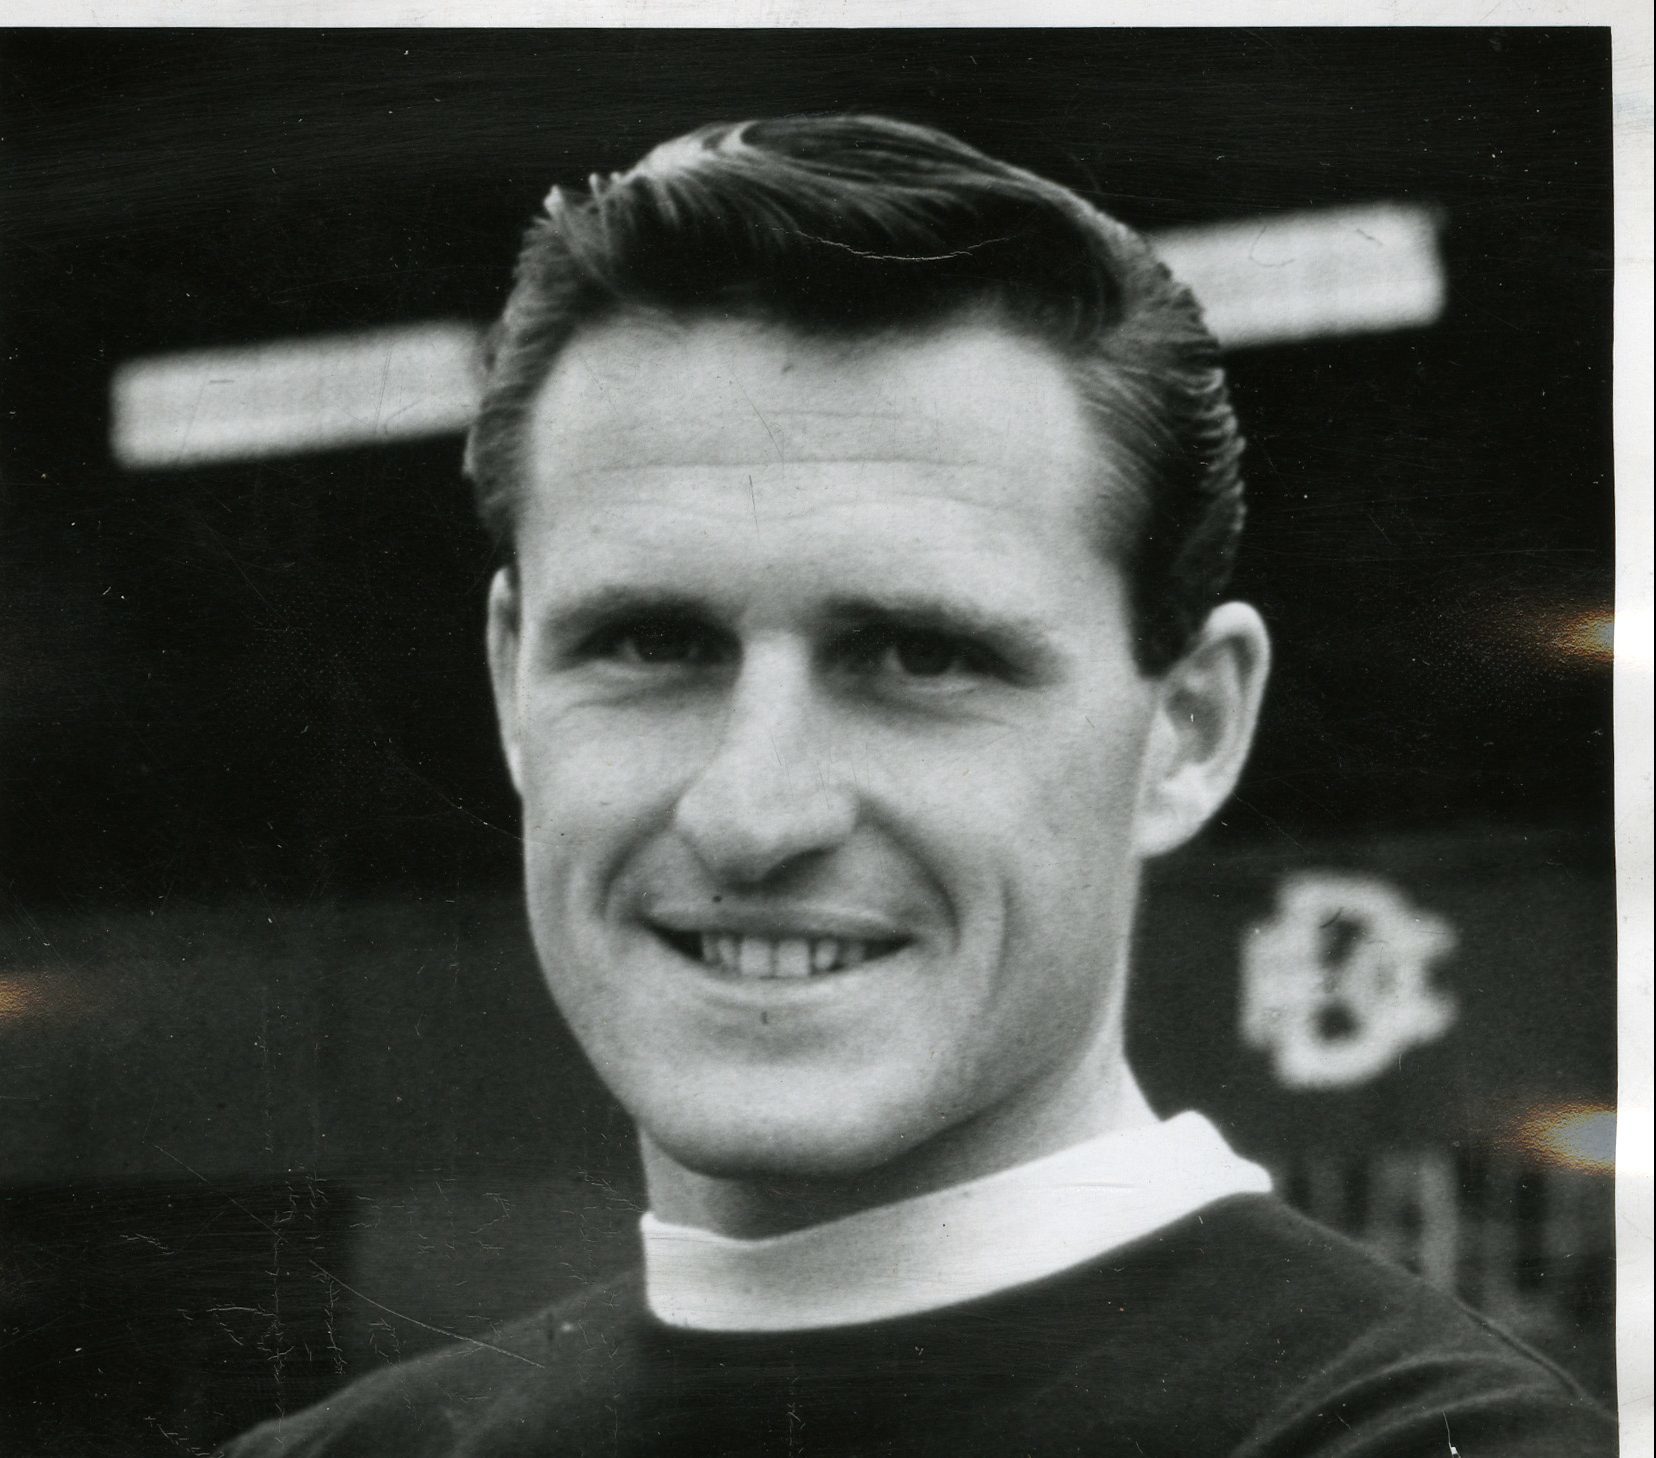 Dundee Football Club player Alan Cousin, from   26 October 1962.